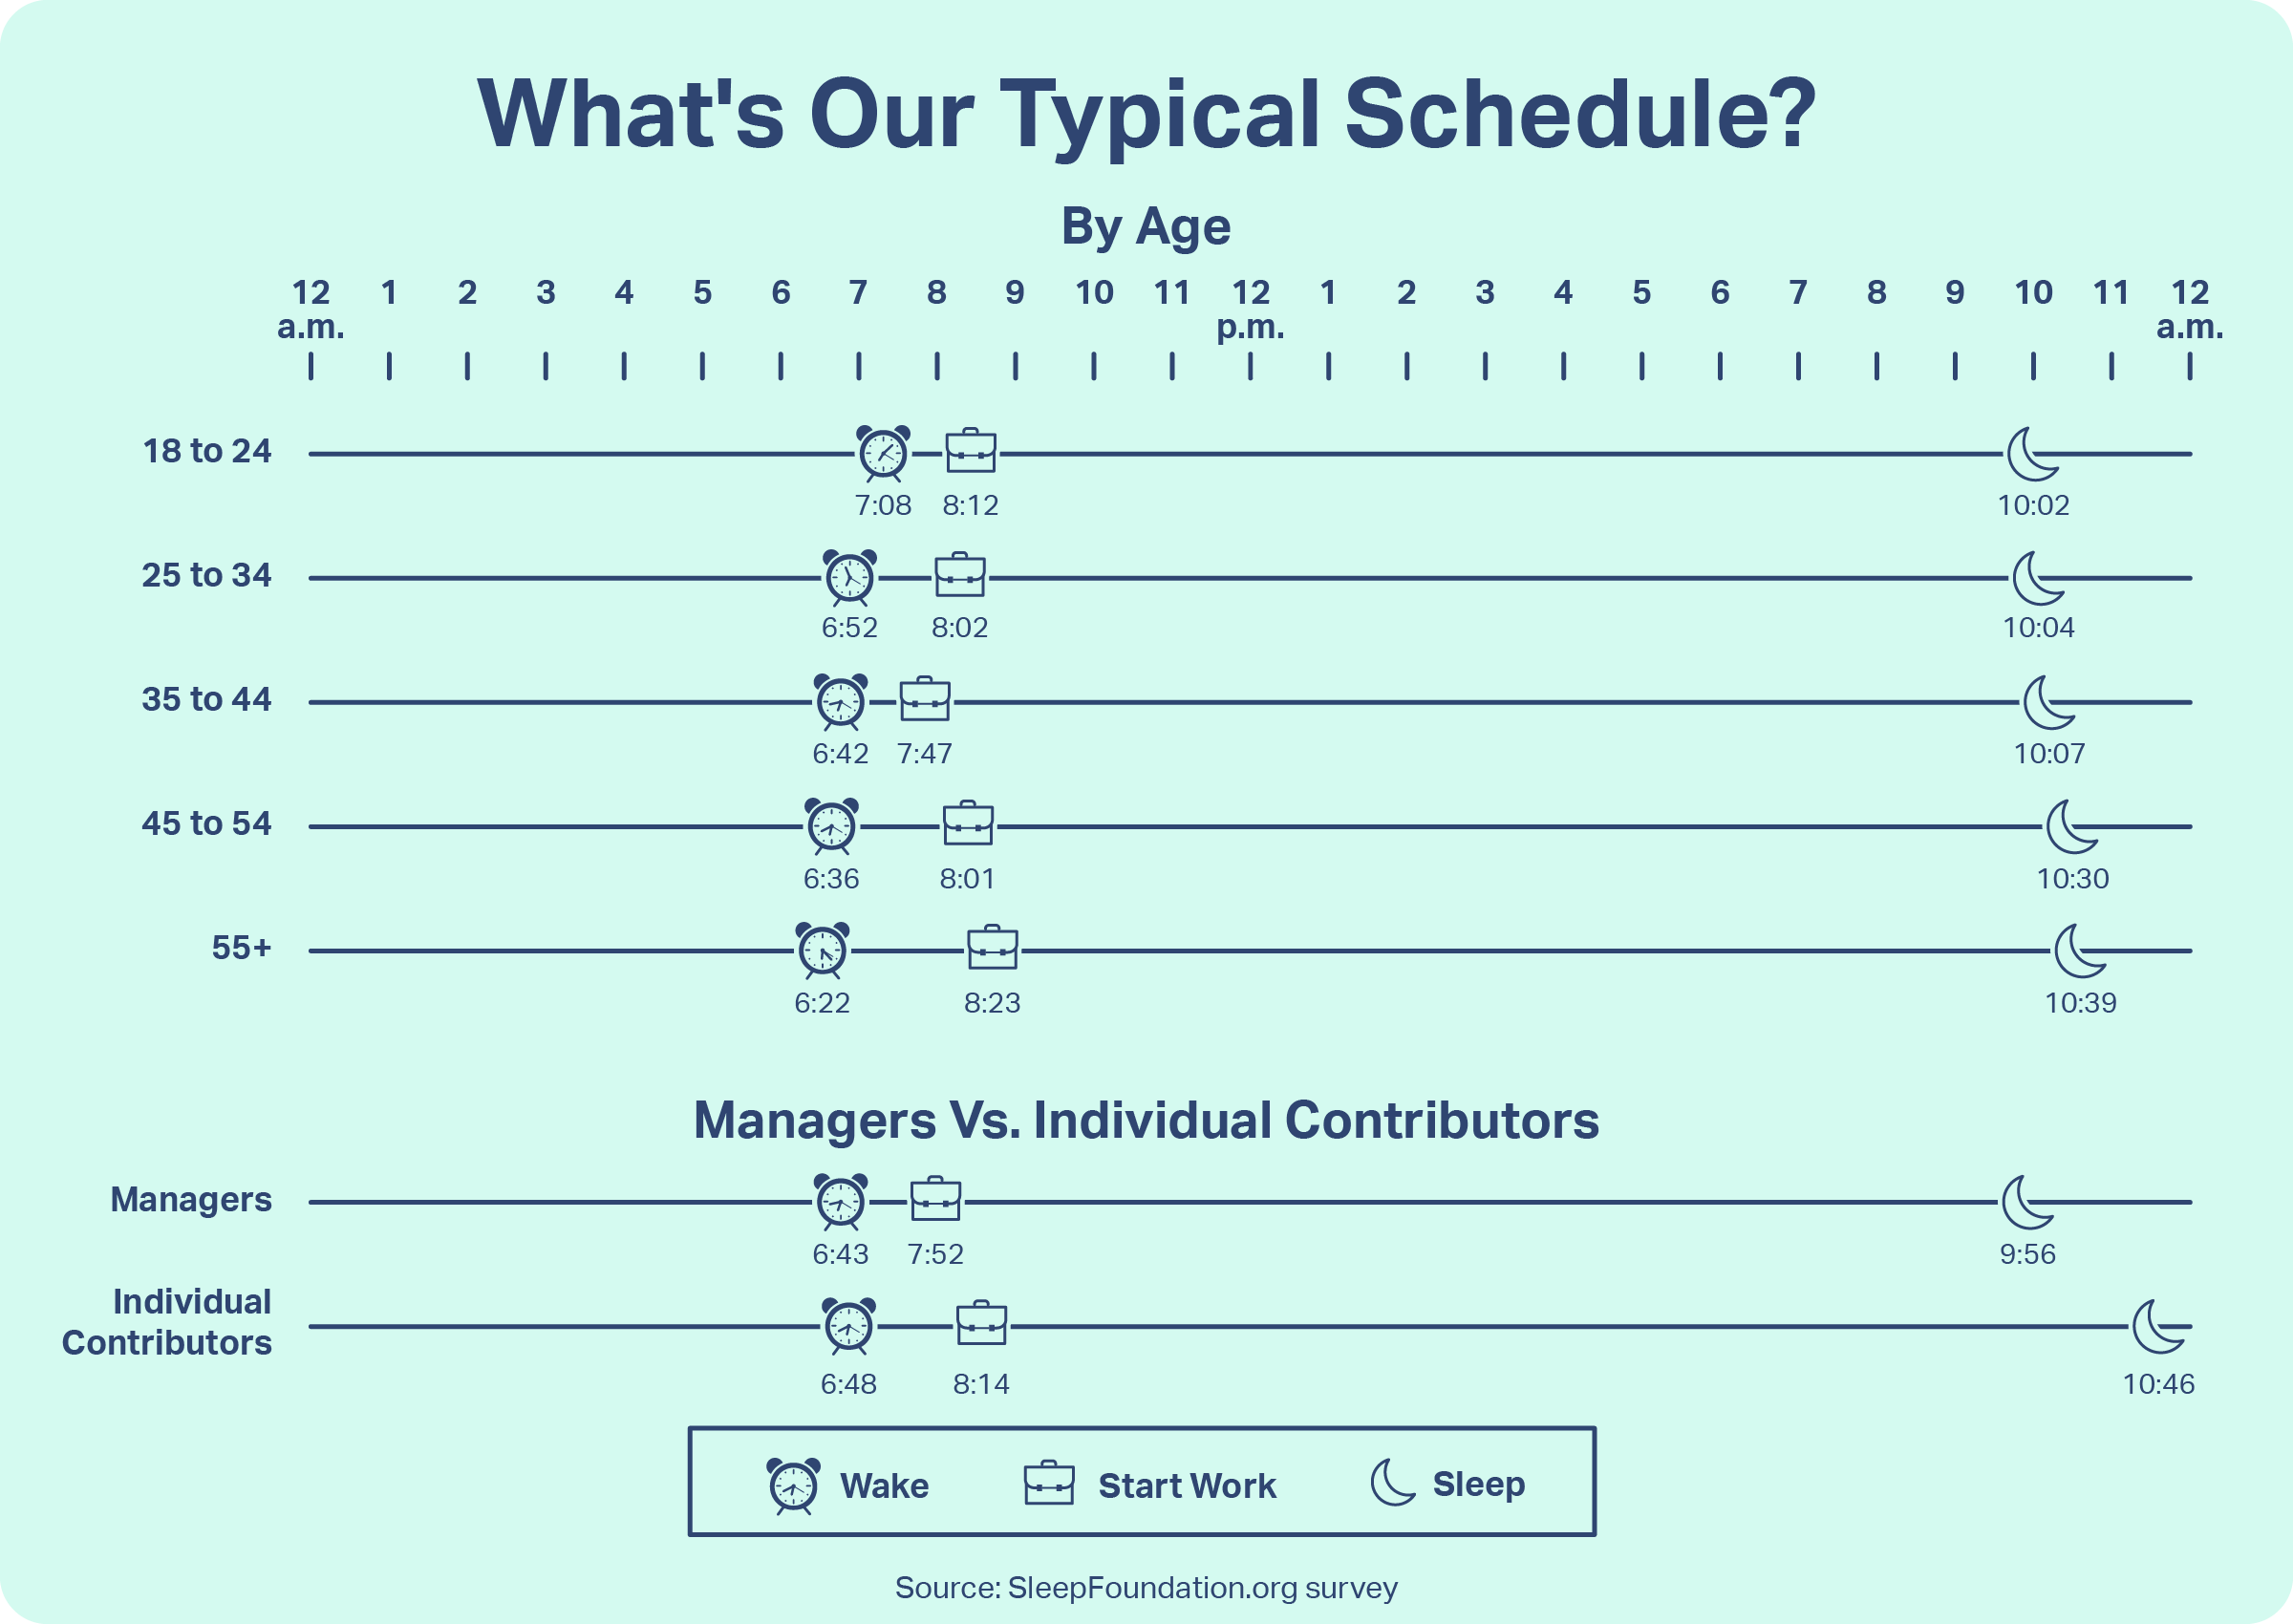 What's Our Typical Schedule?